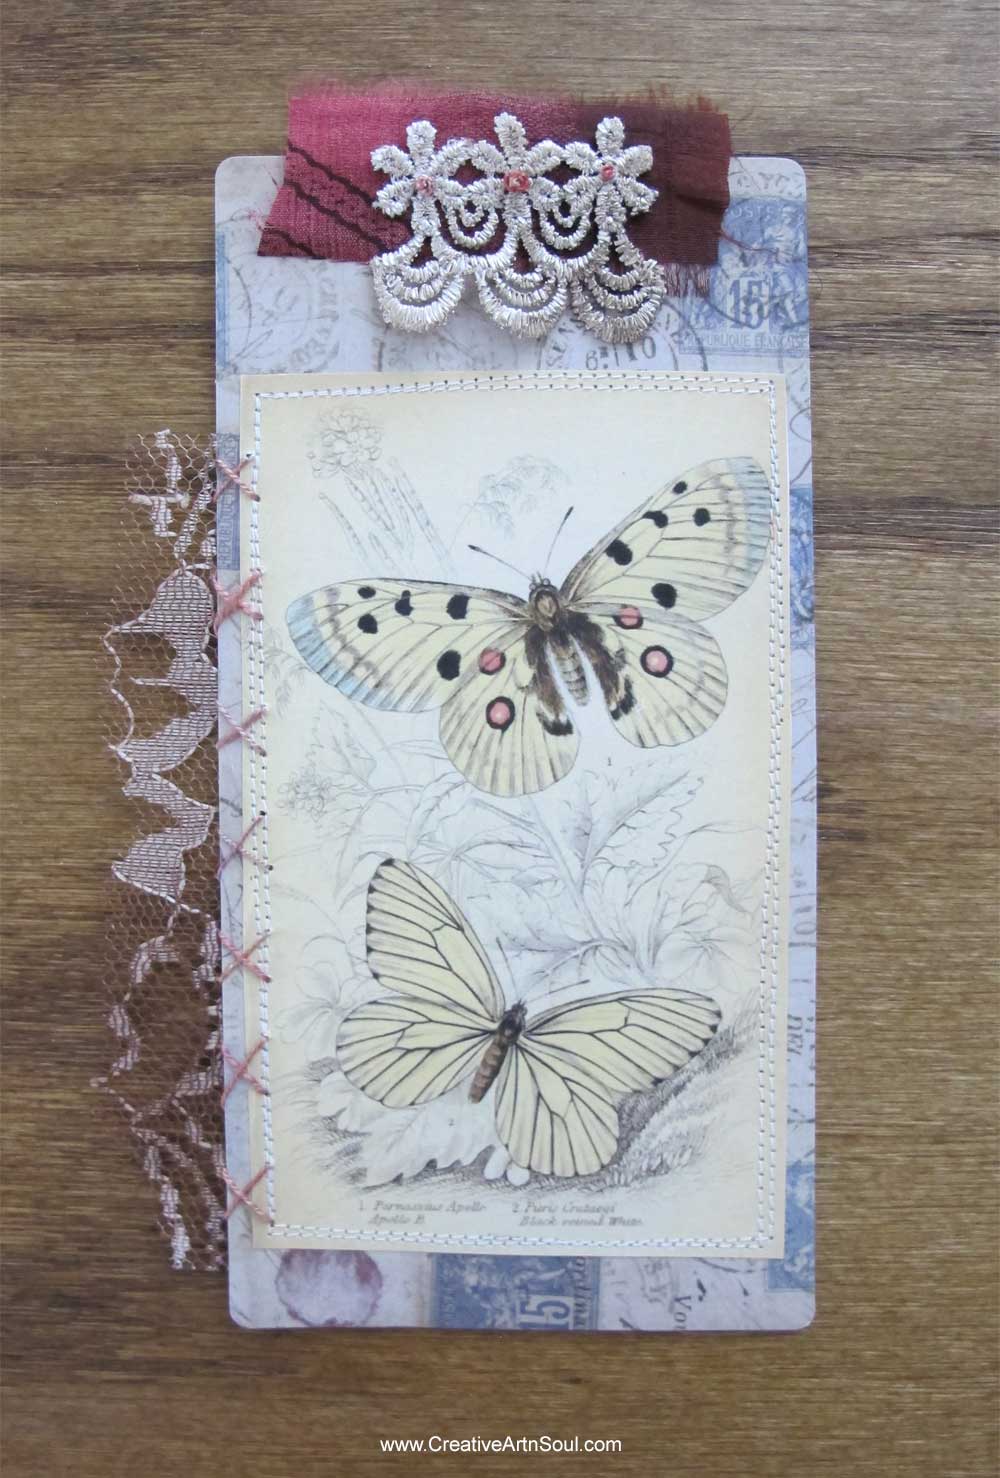 How to Make a Stitched Mixed Media Folio Journal